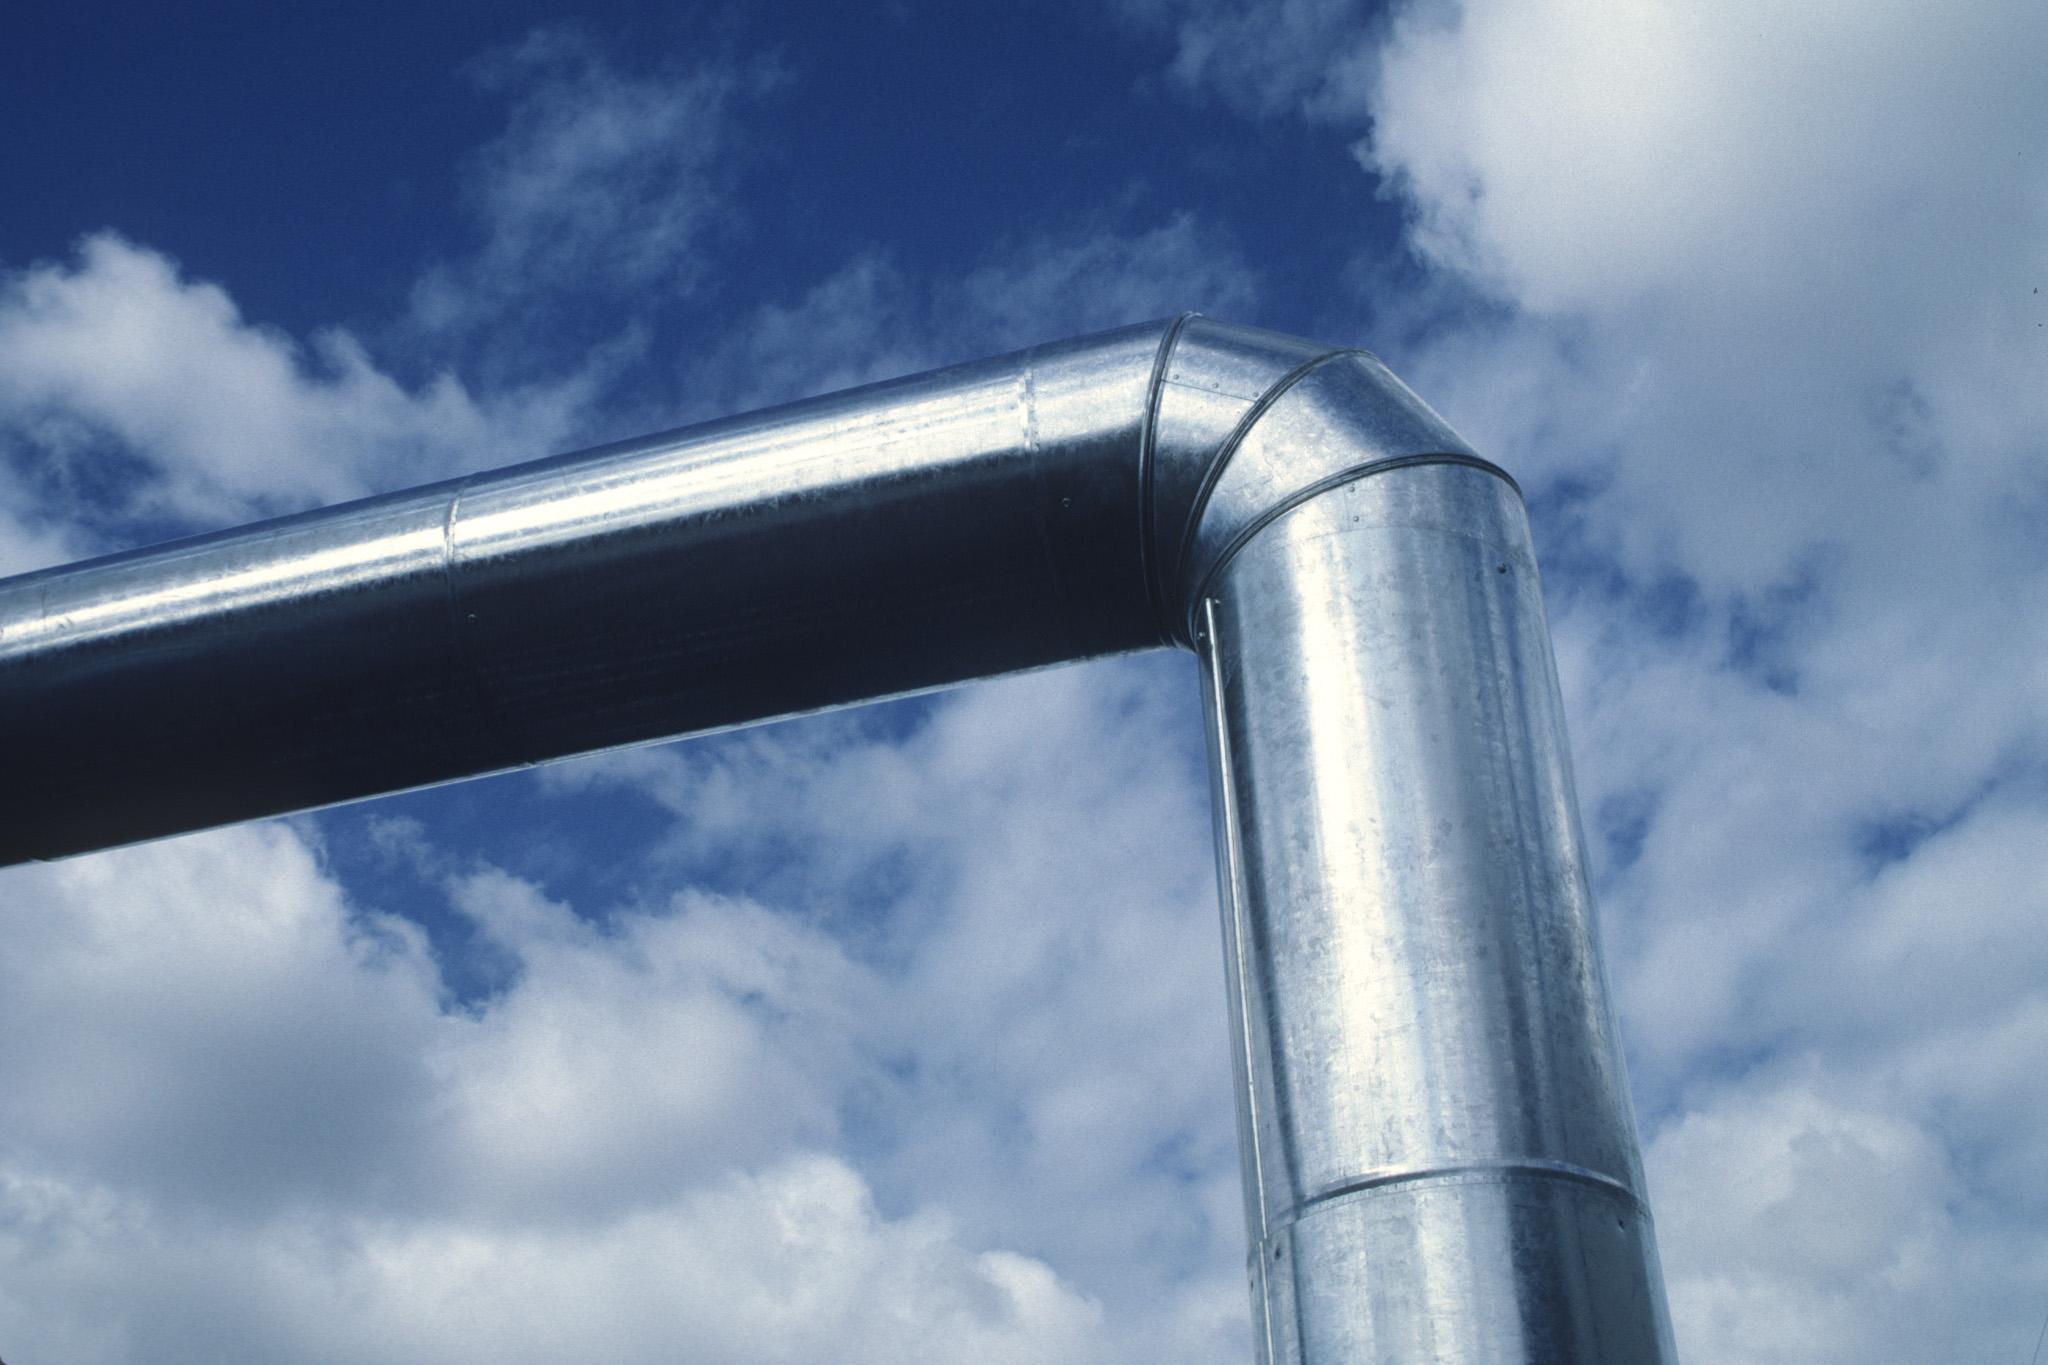 detail image of a large steel duct against a blue and white sky